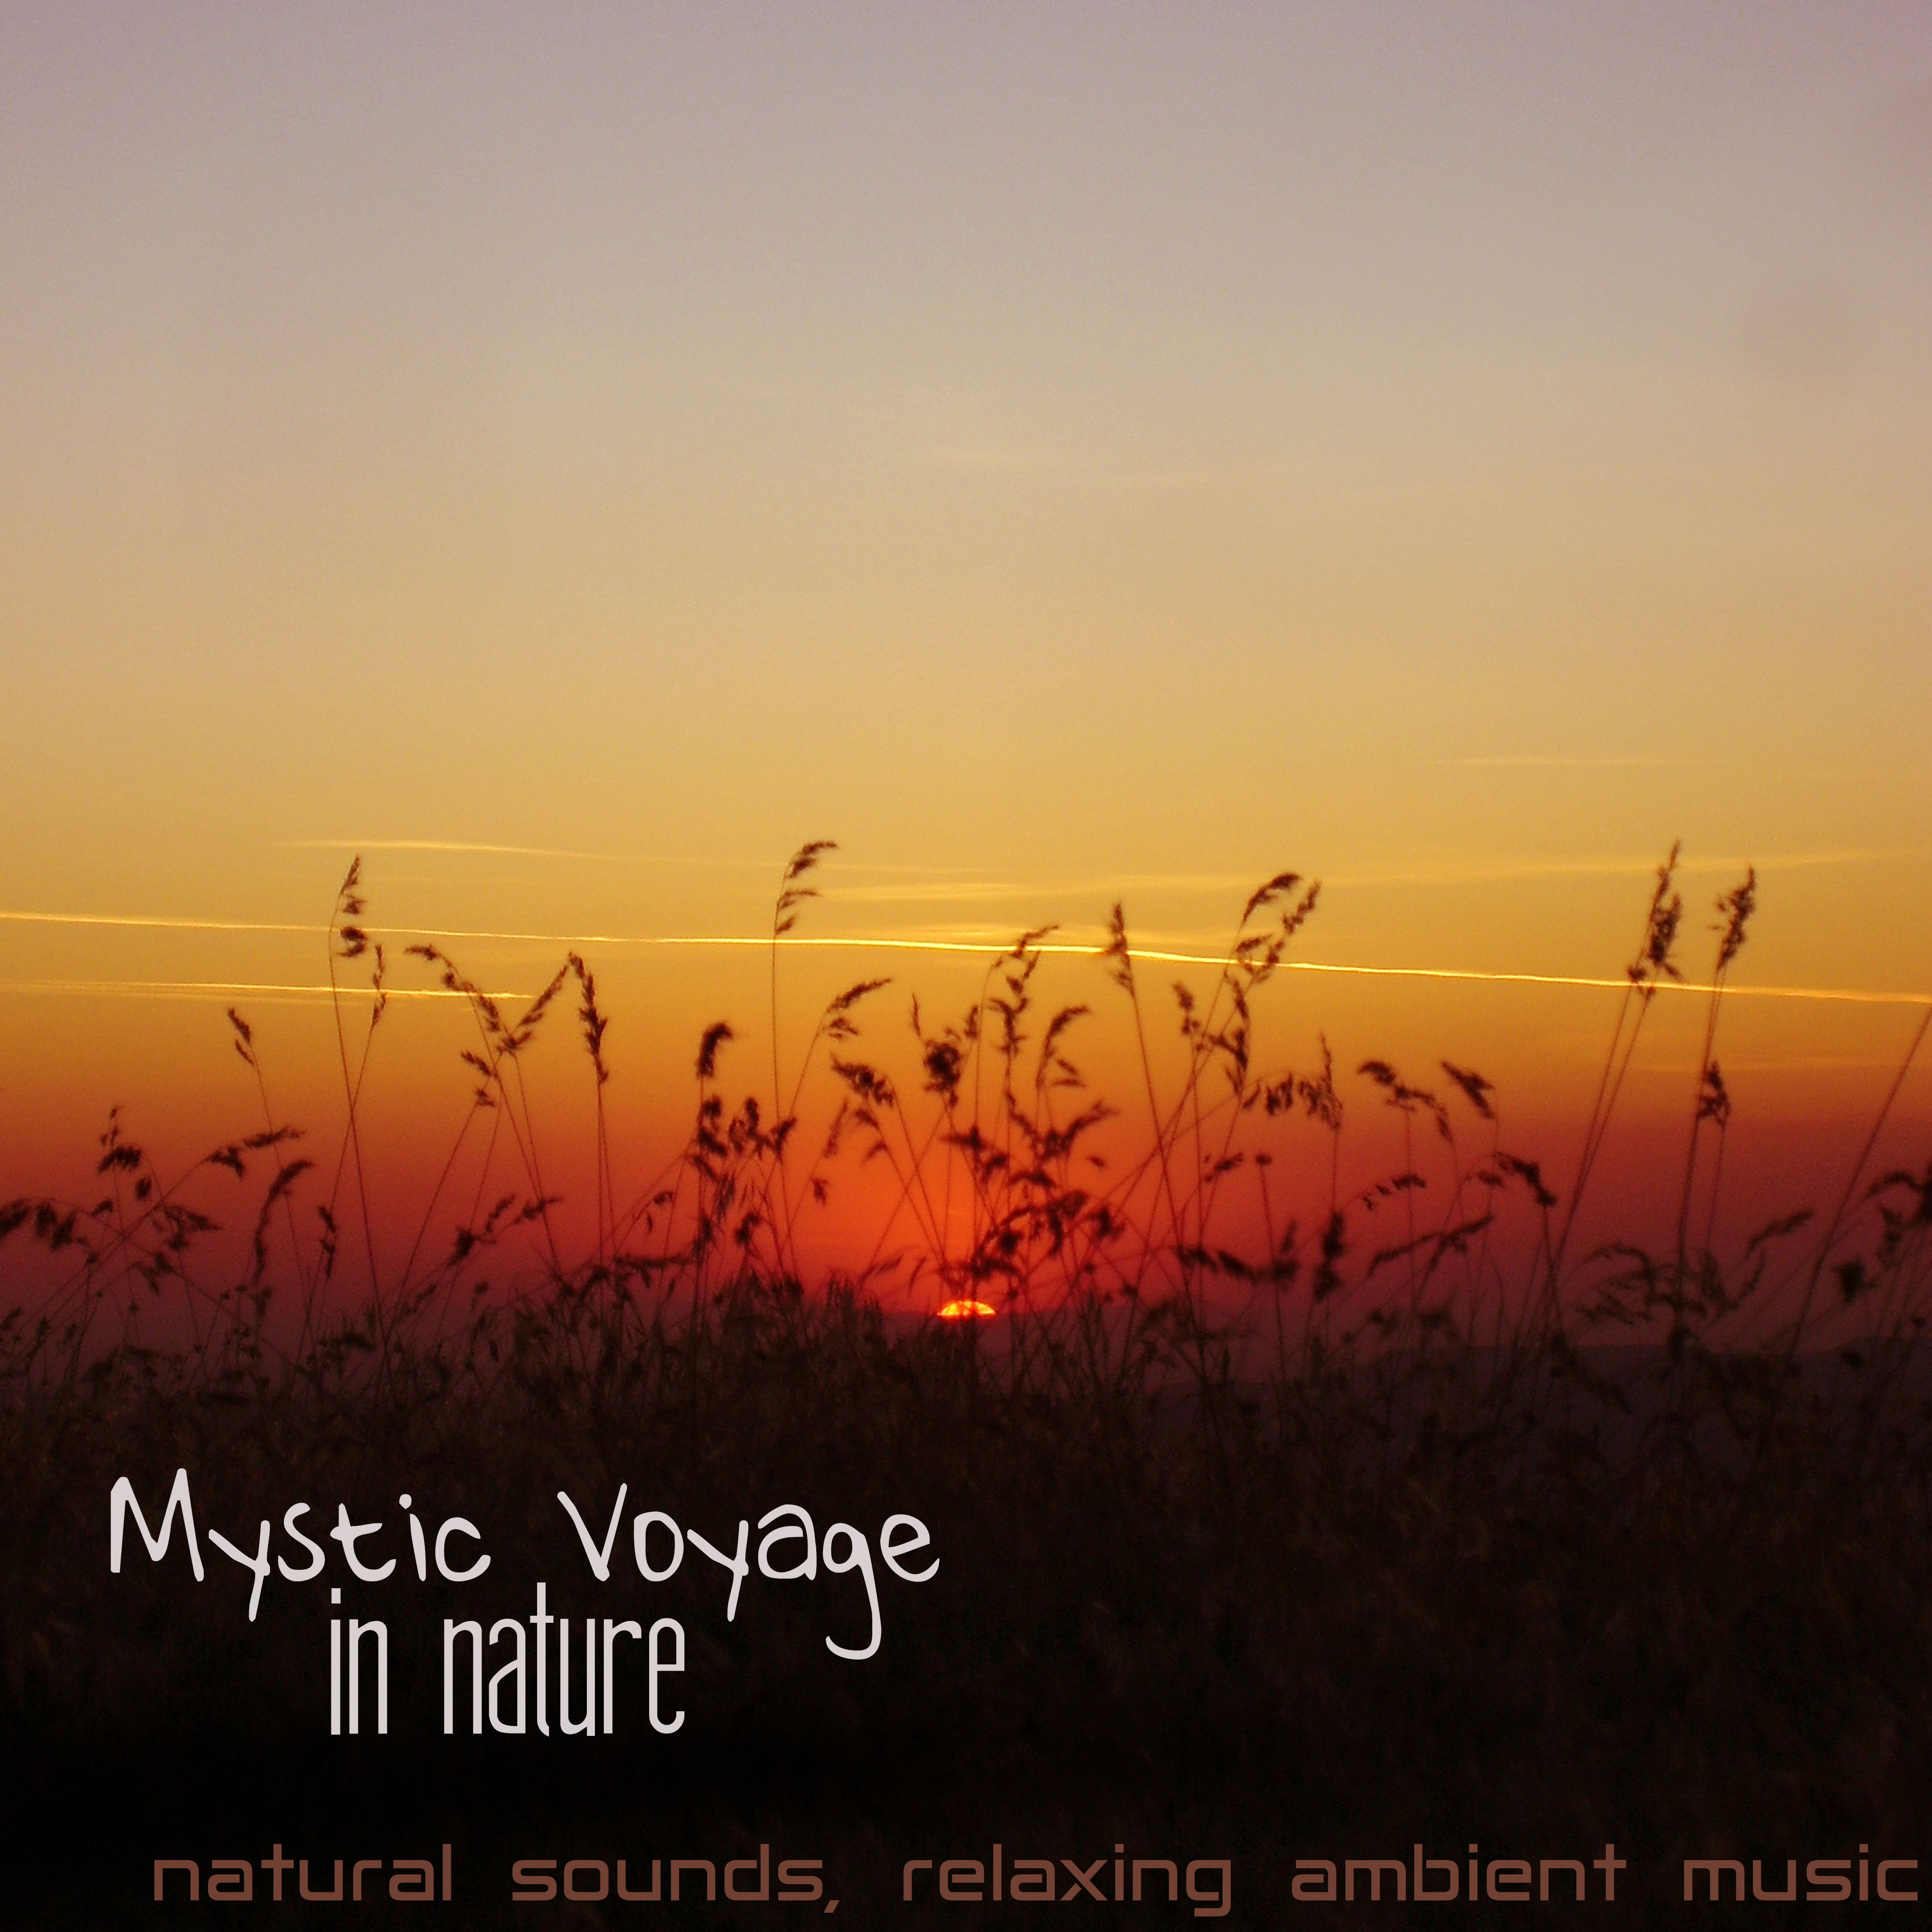 Mystic Voyage in Nature - Natural Sounds, Relaxing Ambient Music for Visualization Meditation